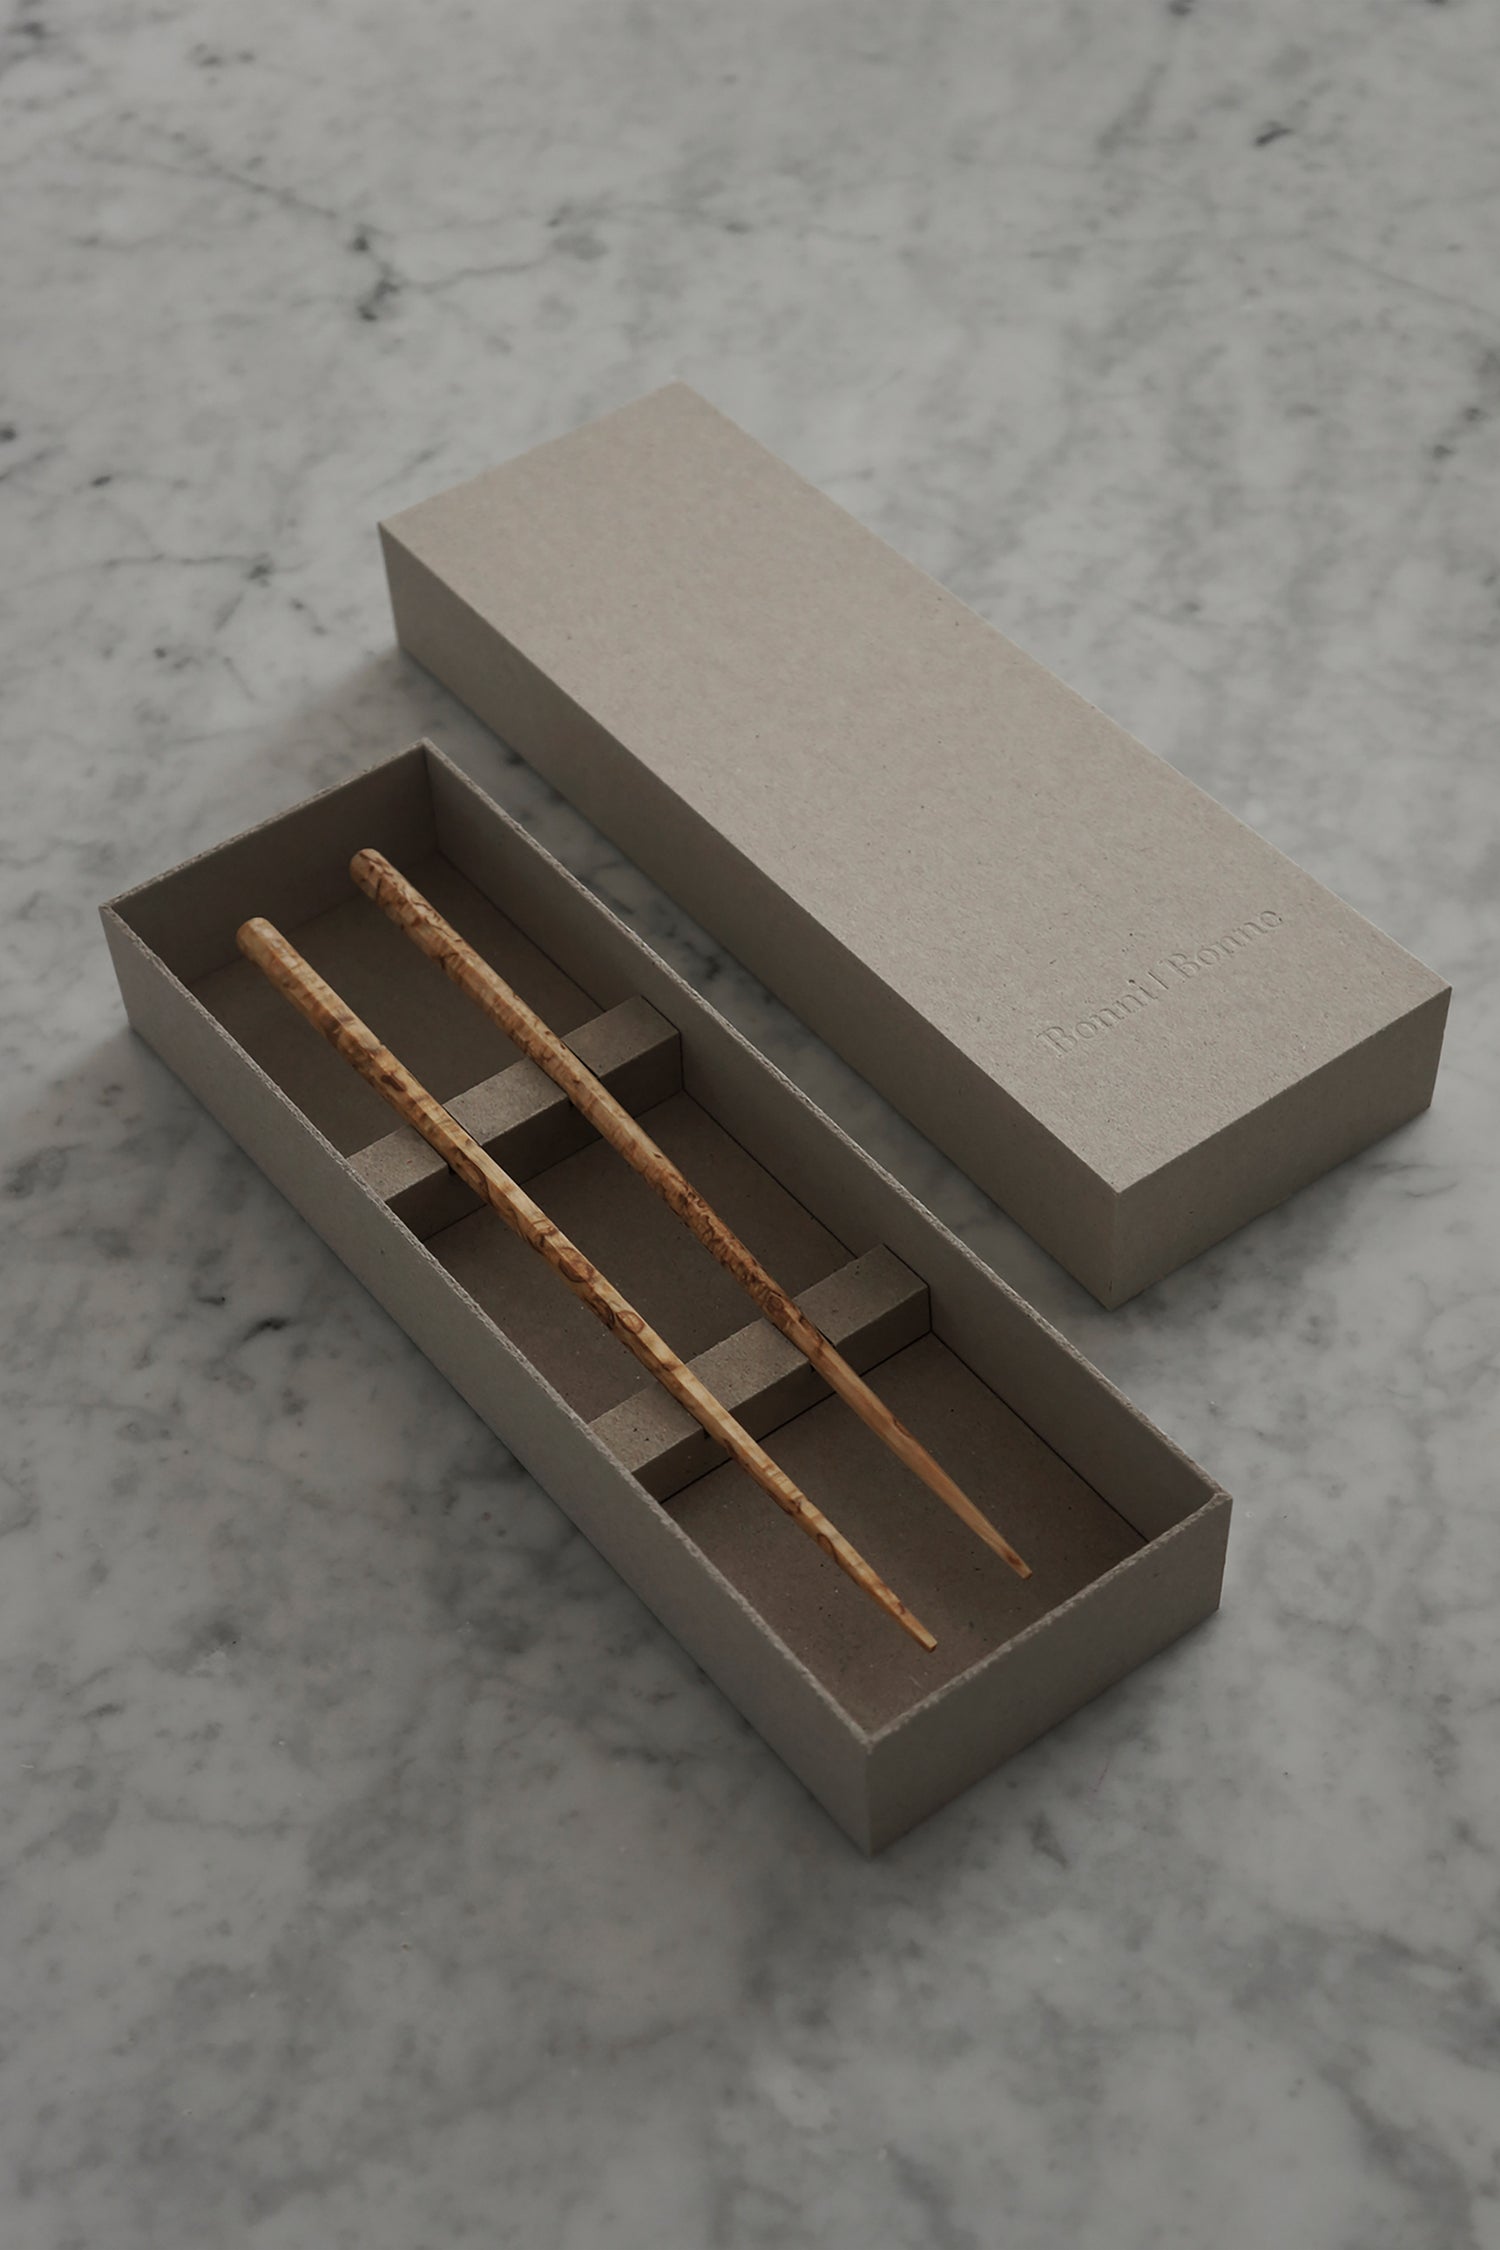 Handmade chopsticks on a marble background with giftbox packaging by Bonni Bonne